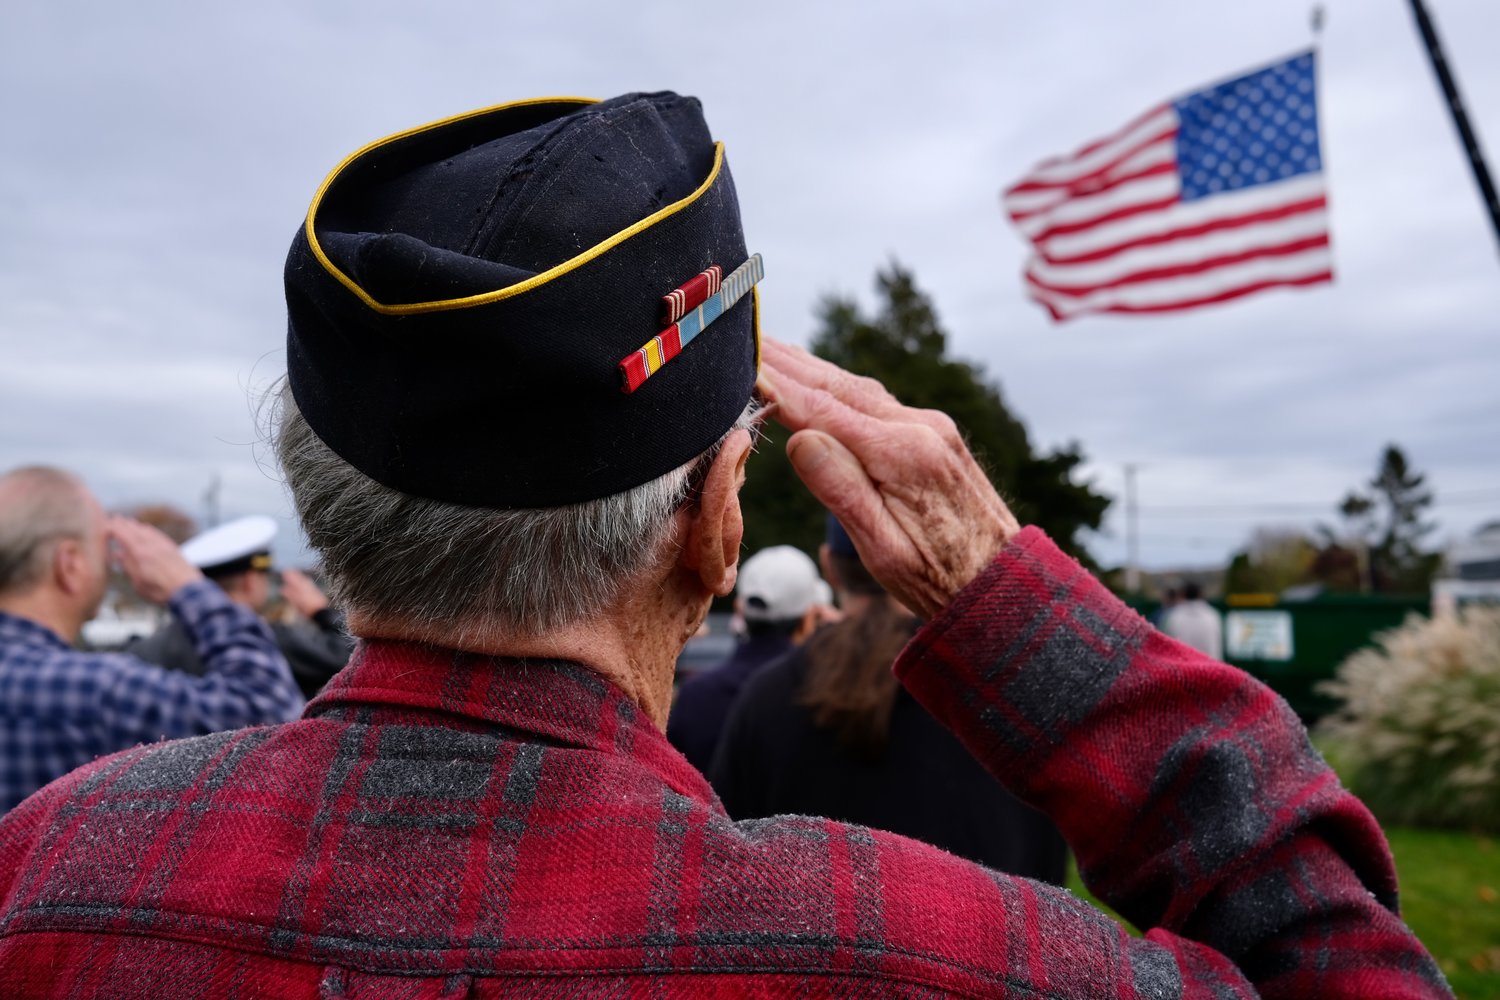 George Cushman, a 91-year-old Army veteran who served time in Korea, salutes the American flag as it’s hoisted up by a crane at Thrive Coffee House in Island Park this morning. The restaurant honored veterans with a special ceremony that featured a short parade and a performance by the Portsmouth High School Marching Band.